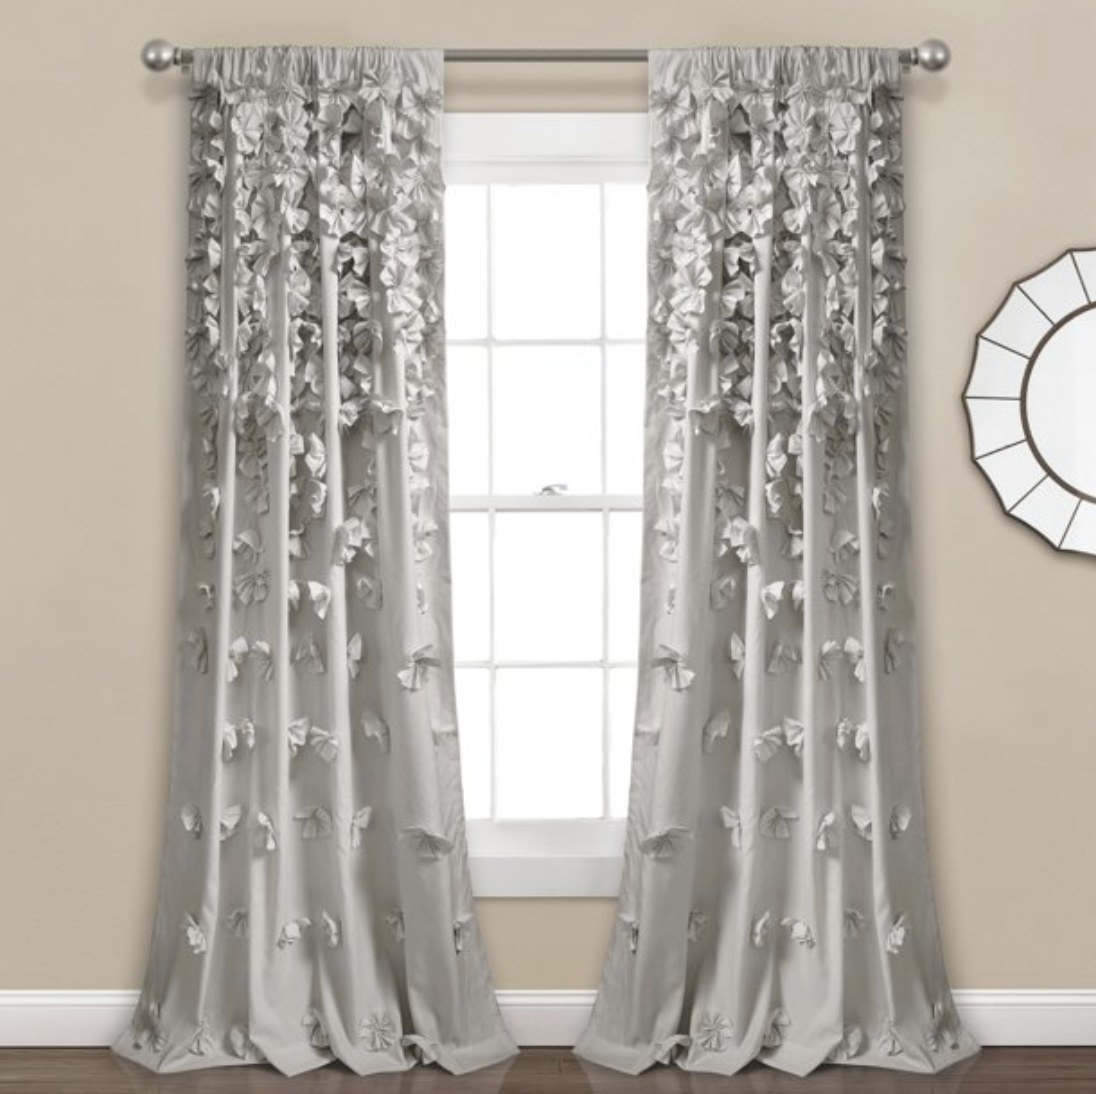 The grey curtains with 3D floral designs 